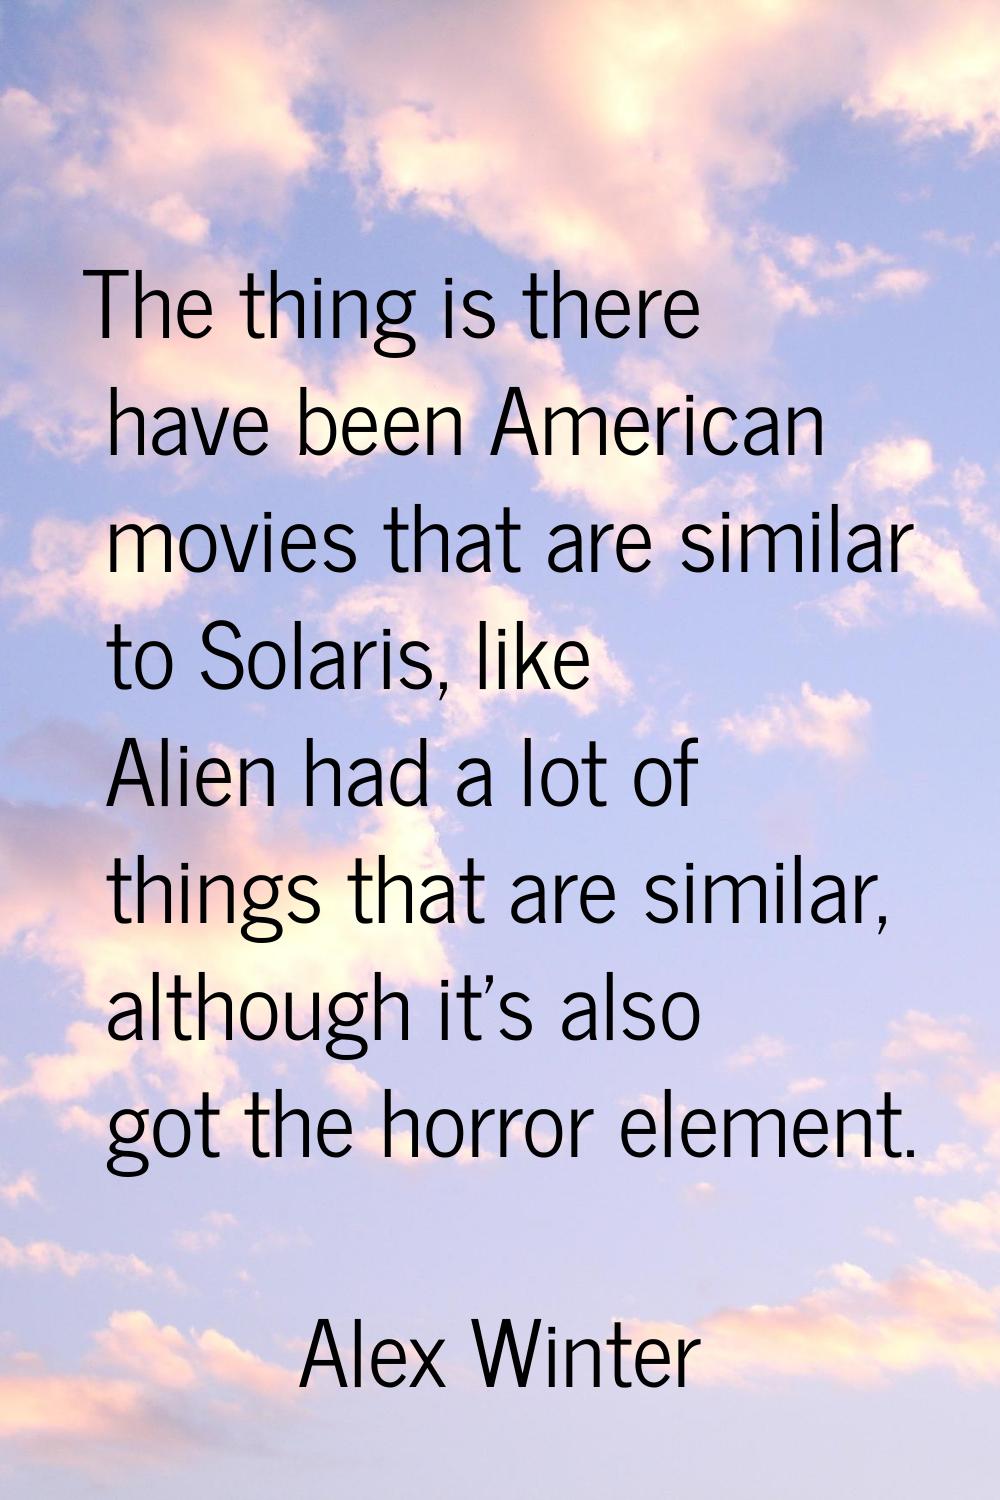 The thing is there have been American movies that are similar to Solaris, like Alien had a lot of t